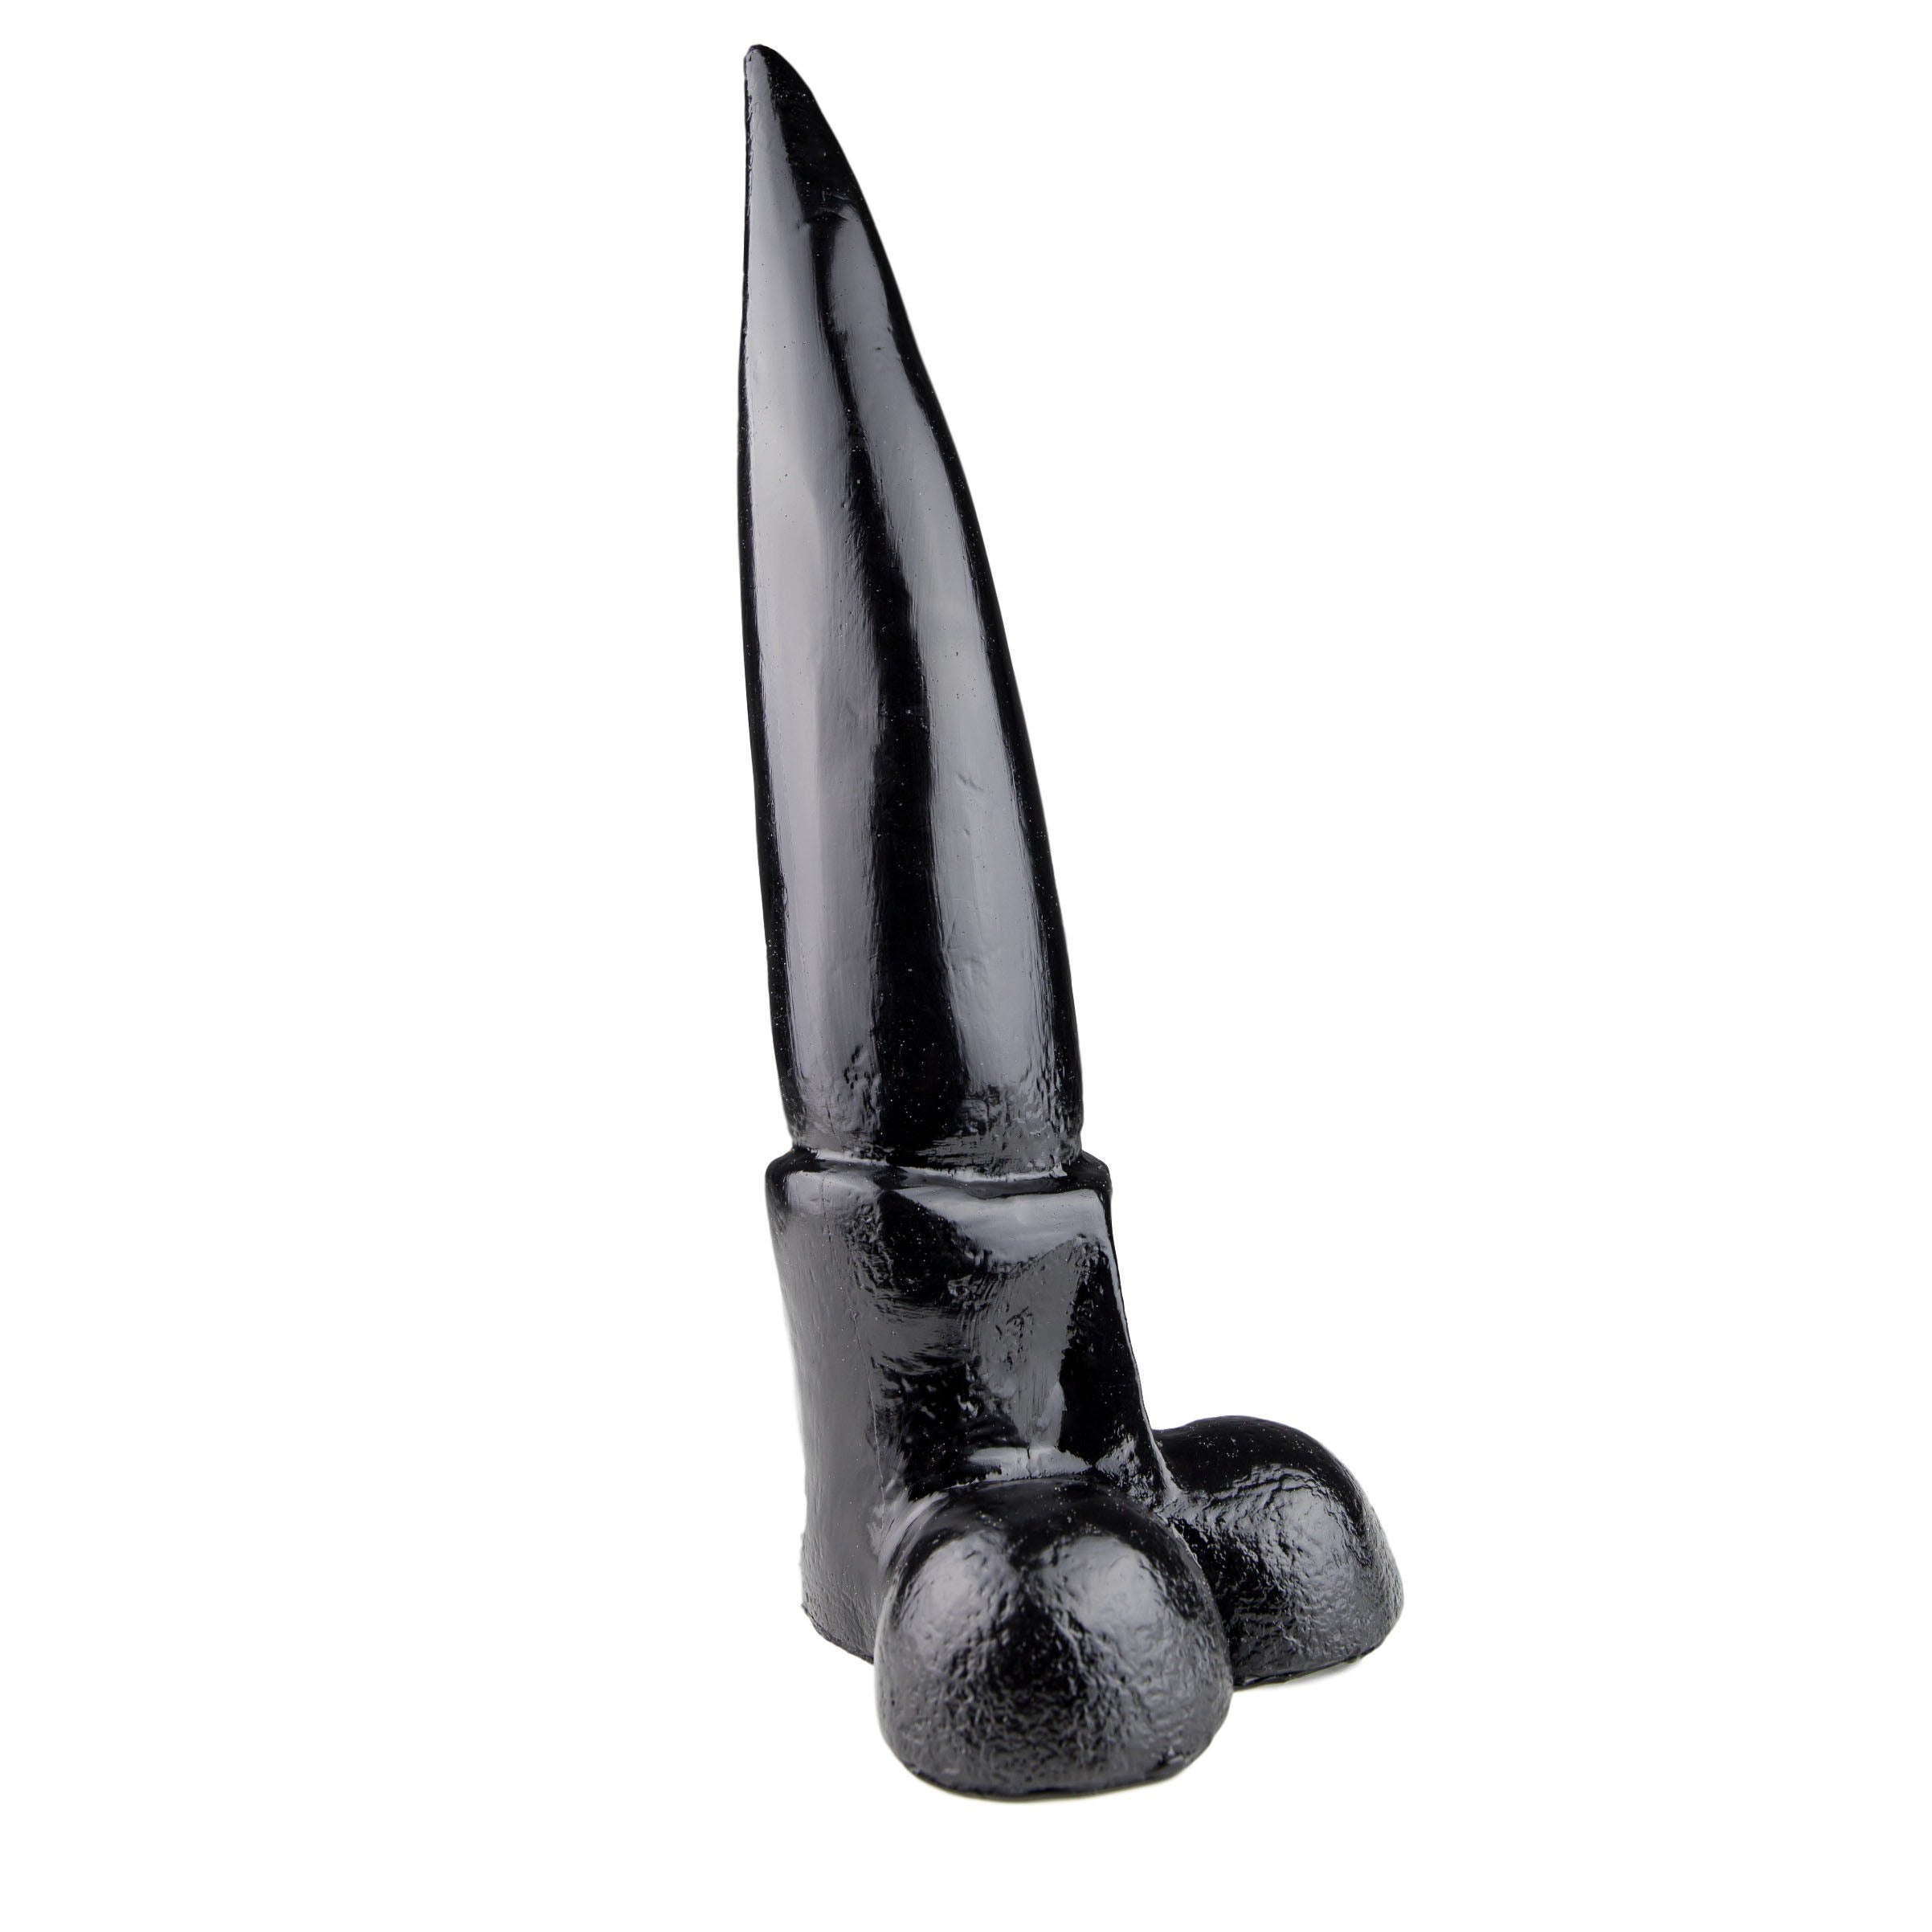 Animhole Wallaby Dildo > Sex Toys > Other Dildos 12 Inches, Both, NEWLY-IMPORTED, Other Dildos, Vinyl - So Luxe Lingerie